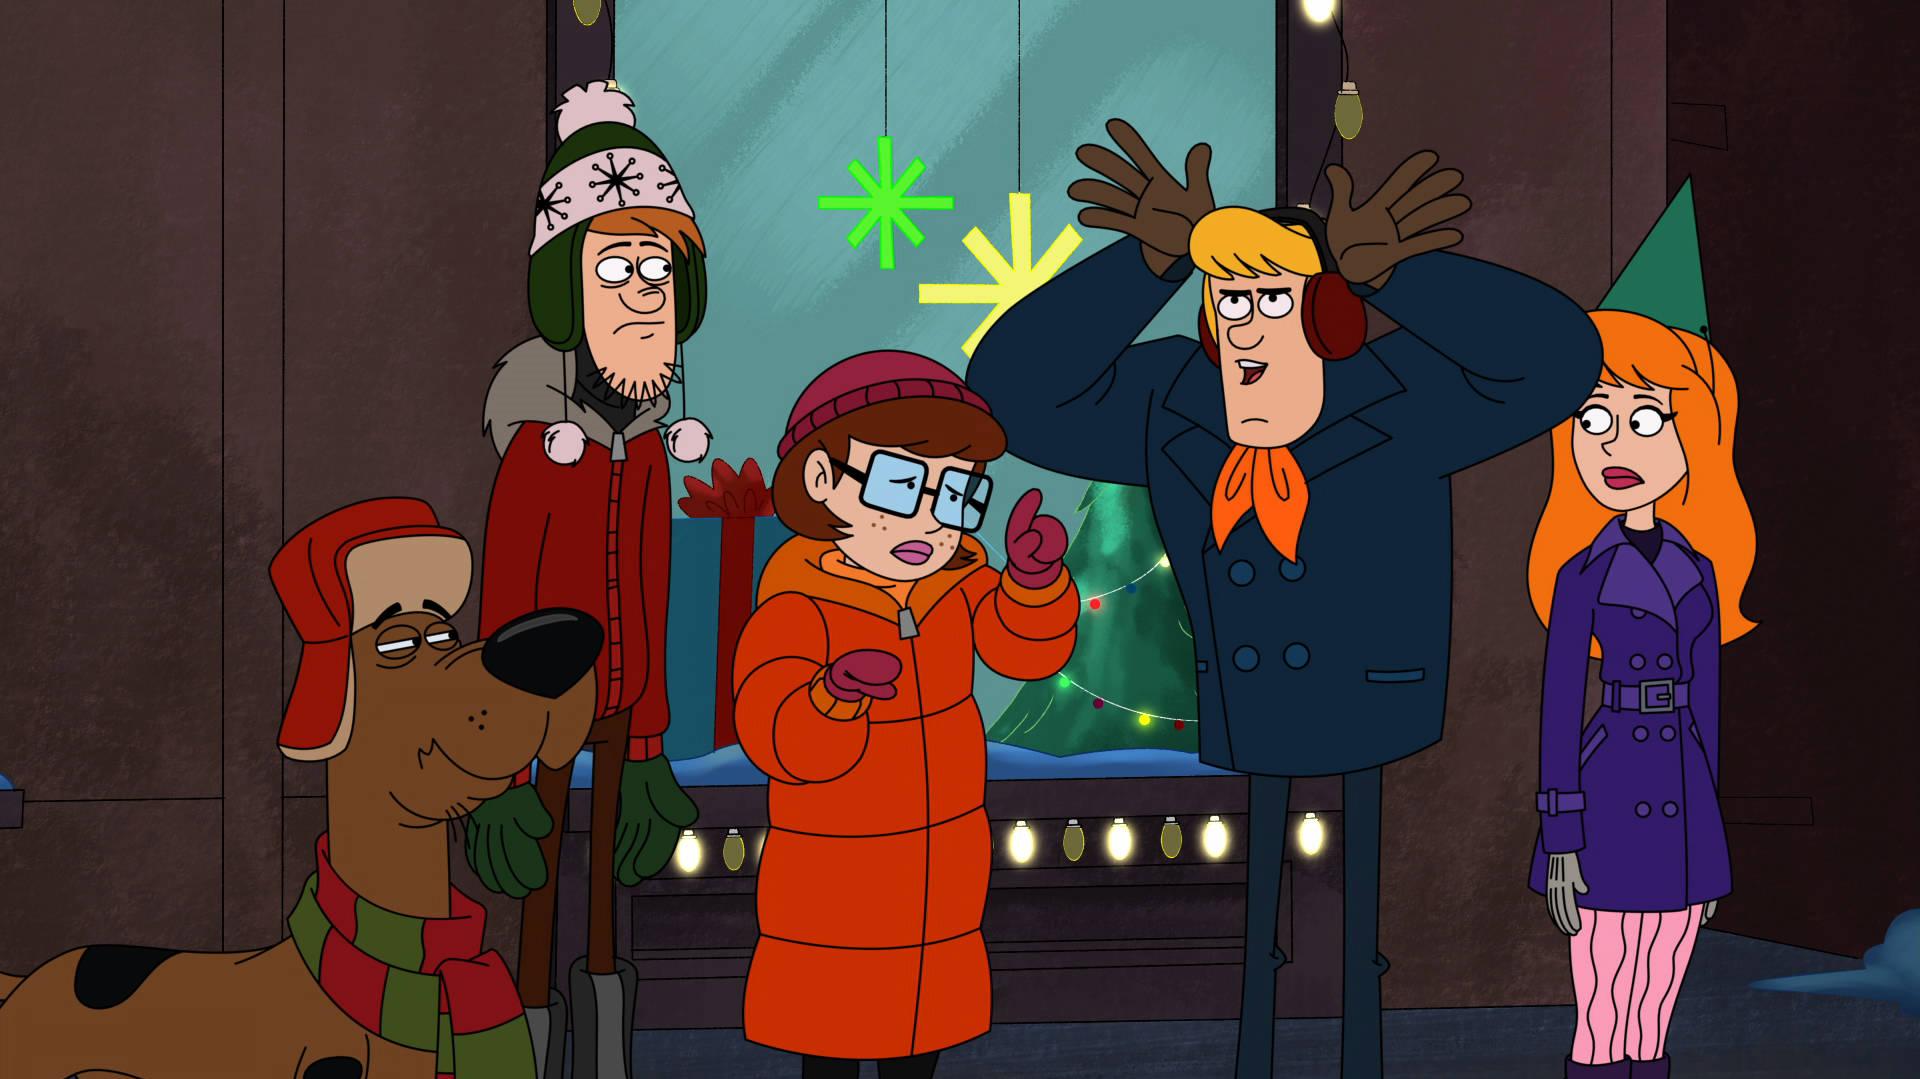 Download Scooby Doo Christmas Theme Wallpaper